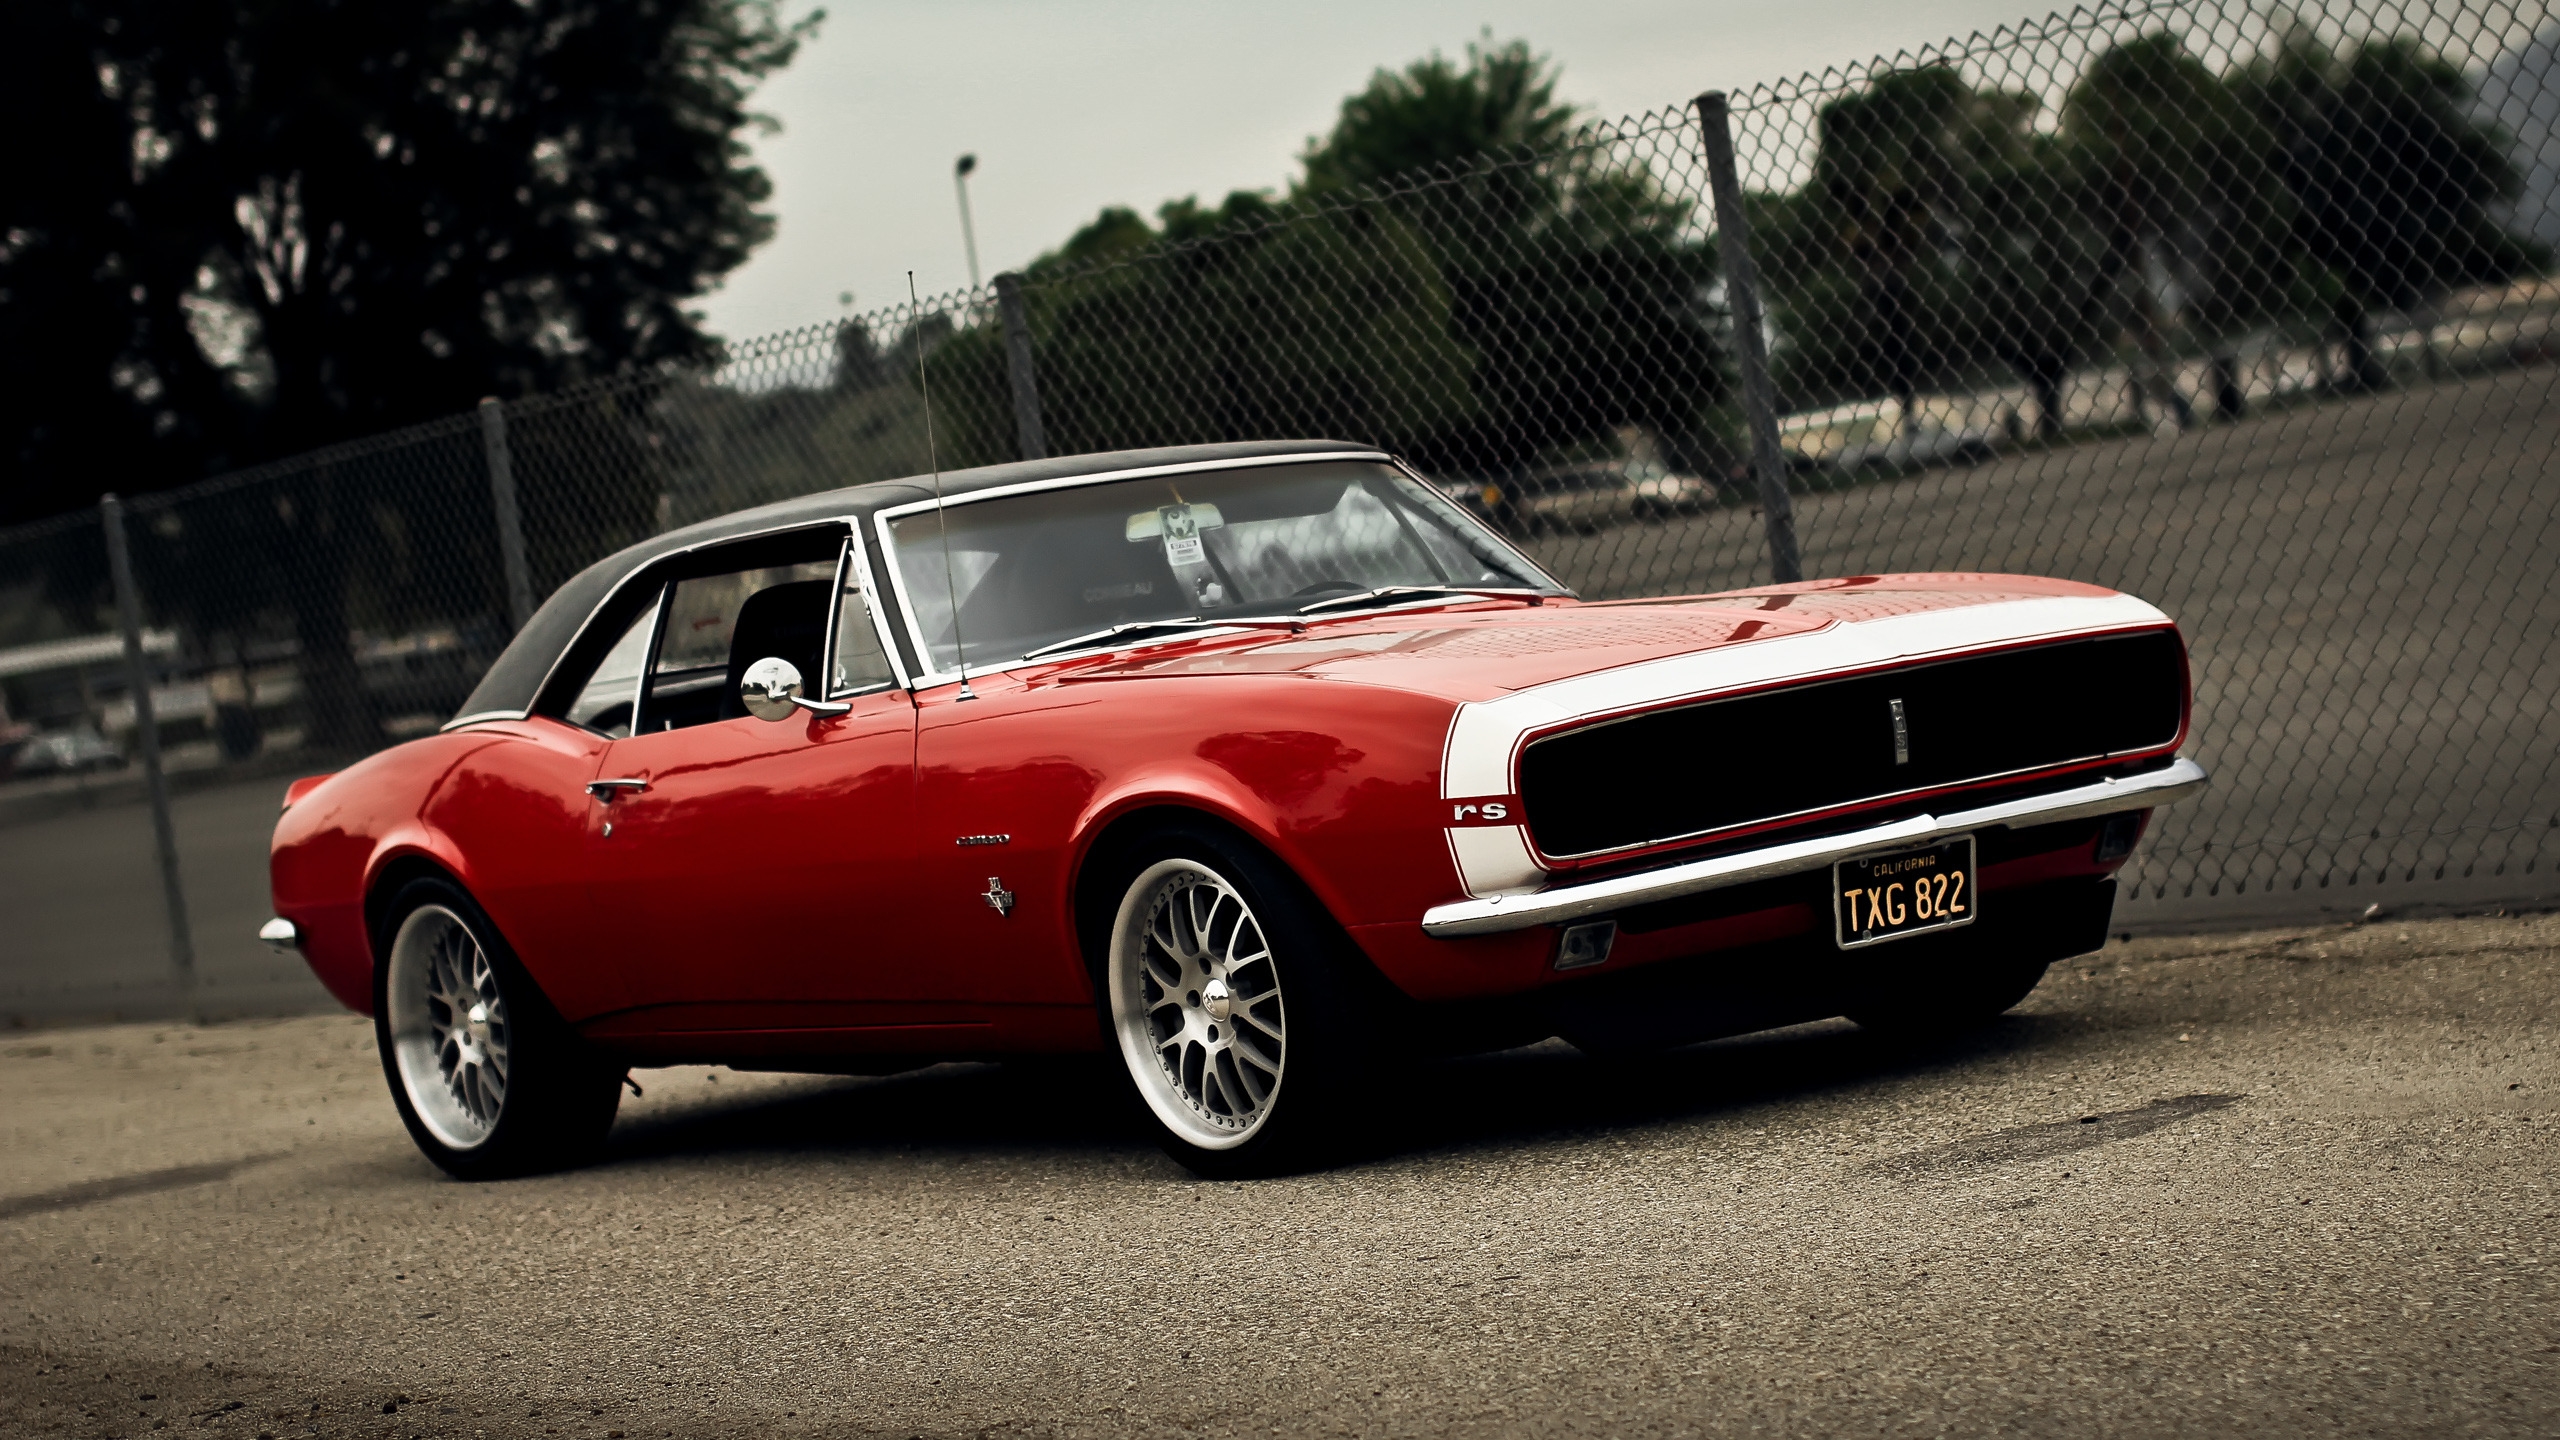 Muscle Car Camaro RS for 2560x1440 HDTV resolution